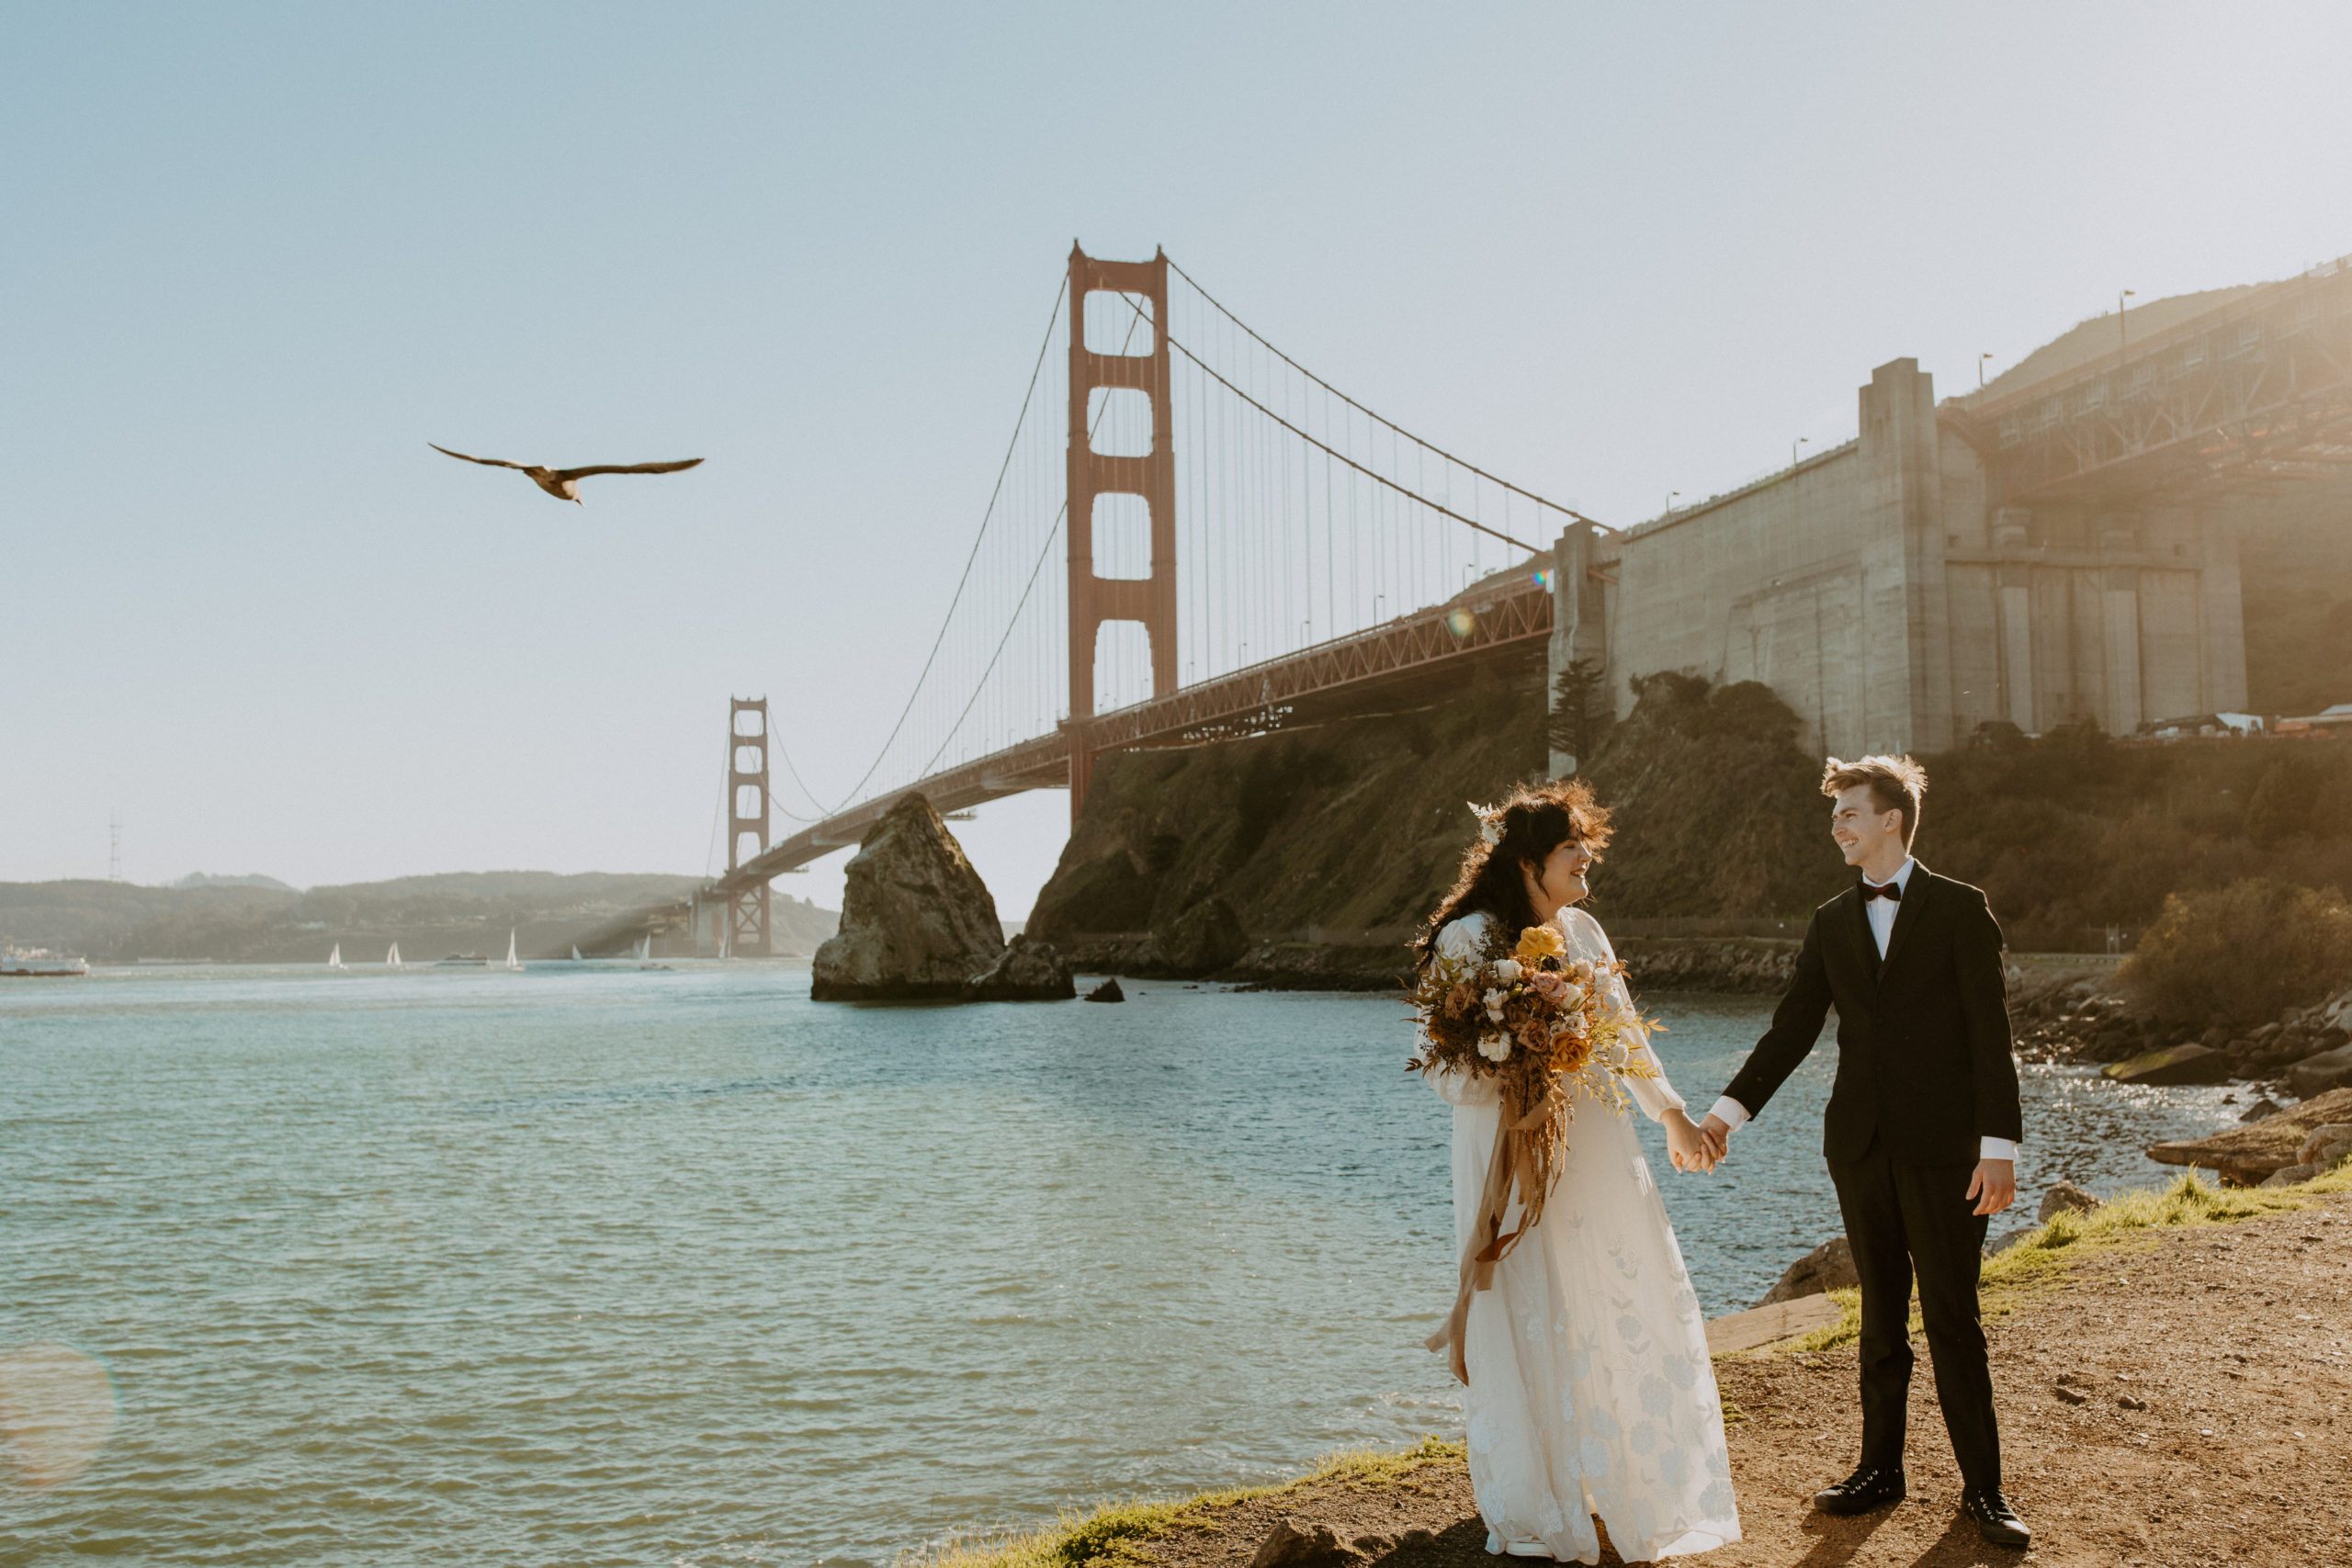 the couple standing on the shore near the Golden Gate Bridge